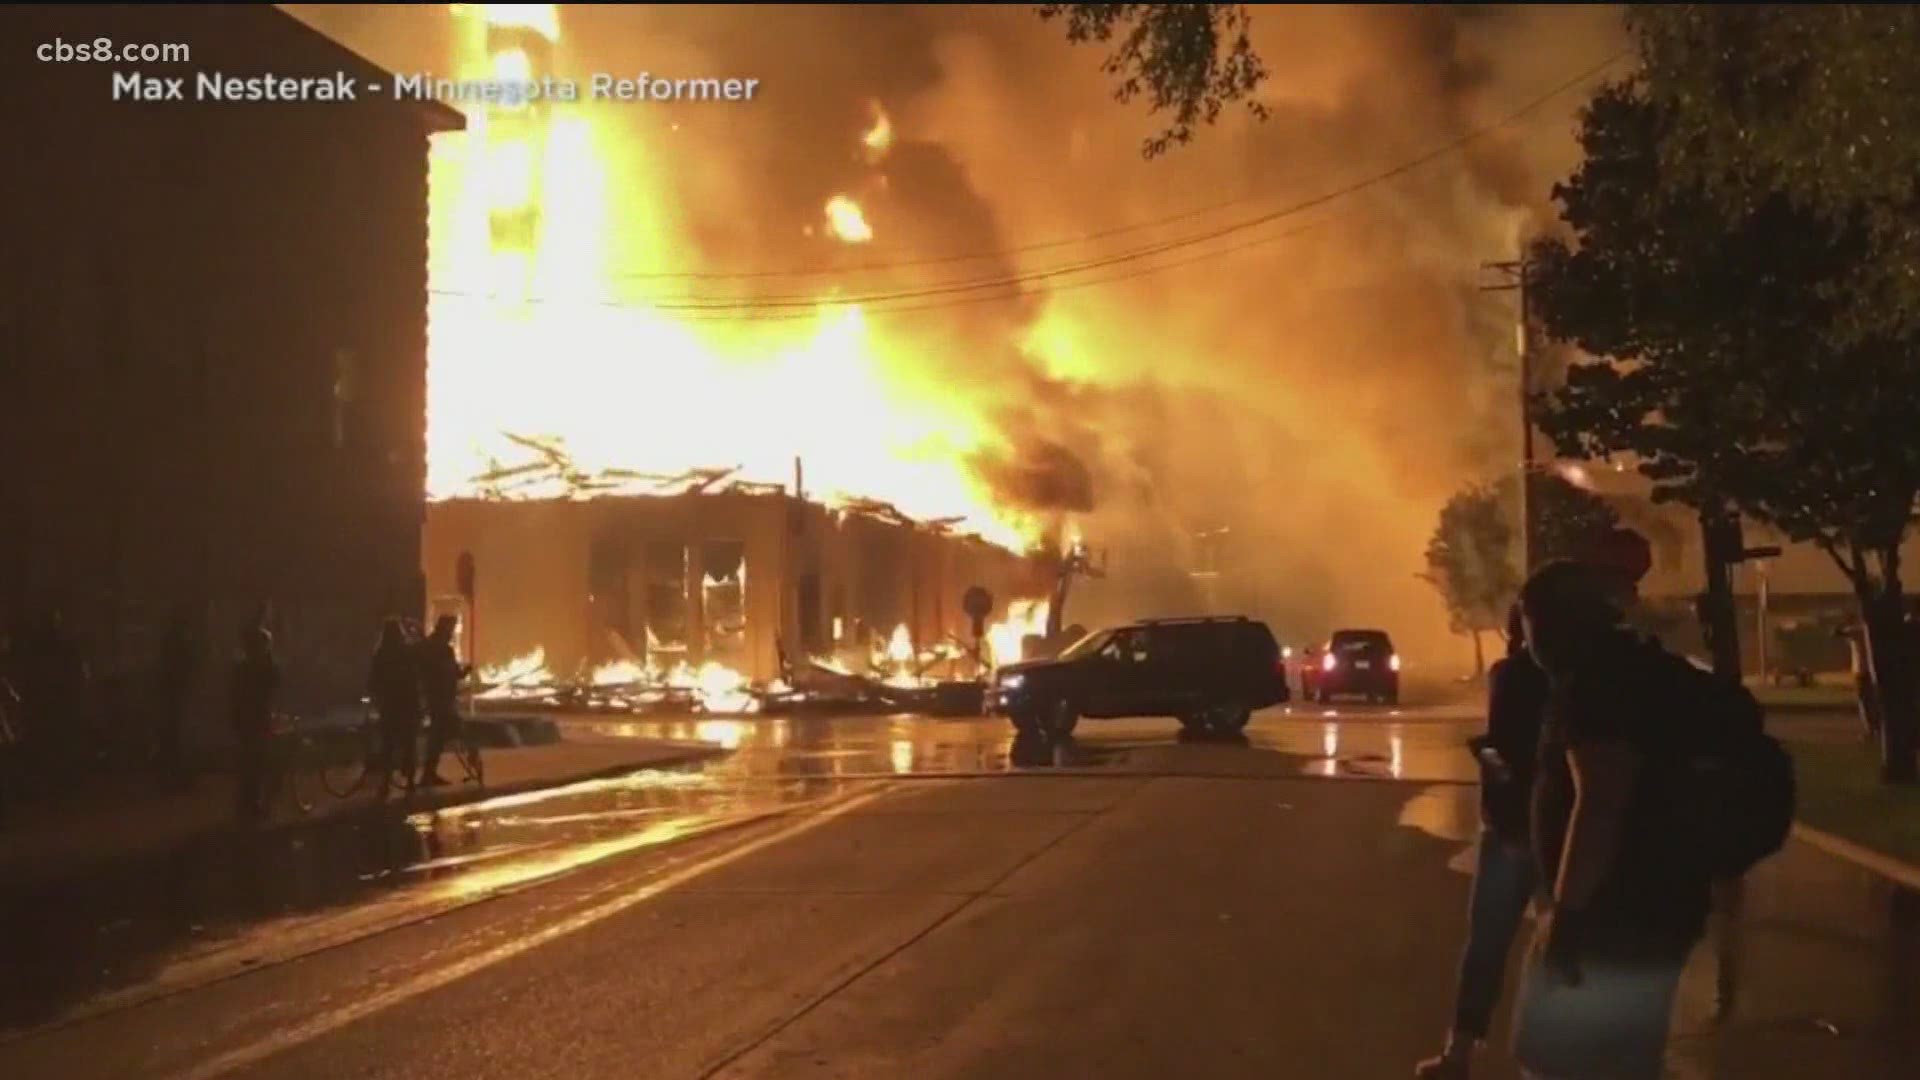 Overnight, the mayhem continued with rioters burning down a police precinct in Minneapolis.